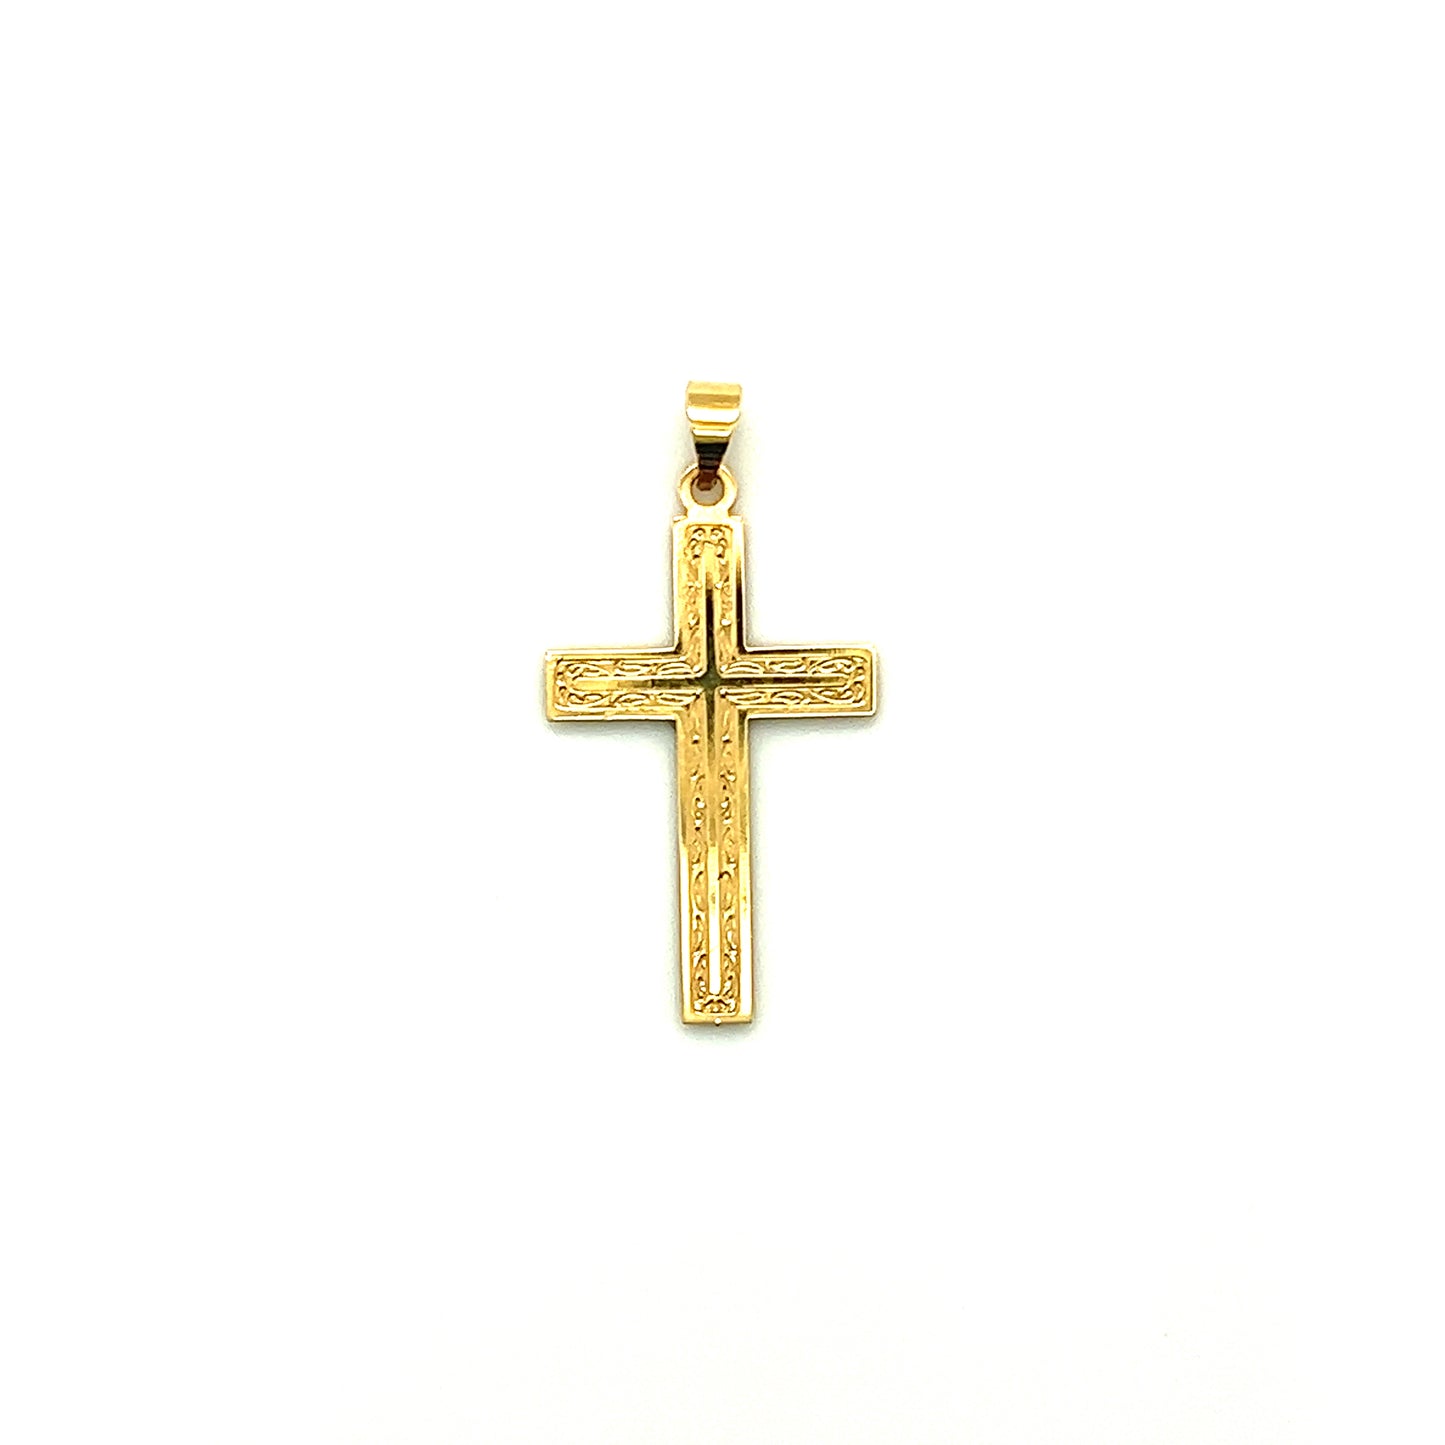 Small Etched Cross Pendant in 14K Yellow Gold Pendant Front View